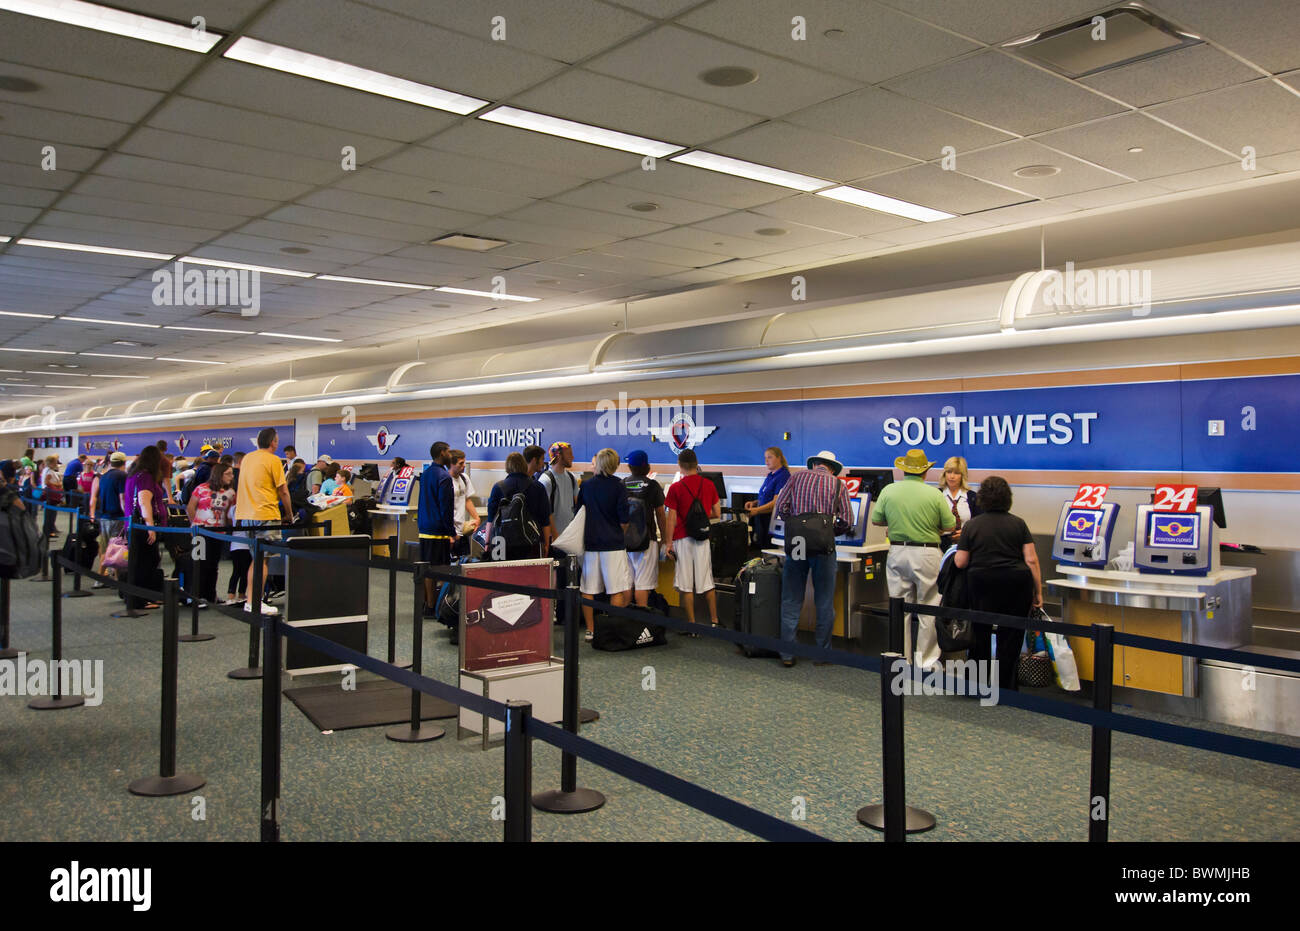 Southwest Airlines check-in desks at Orlando International Airport, Florida, USA Stock Photo